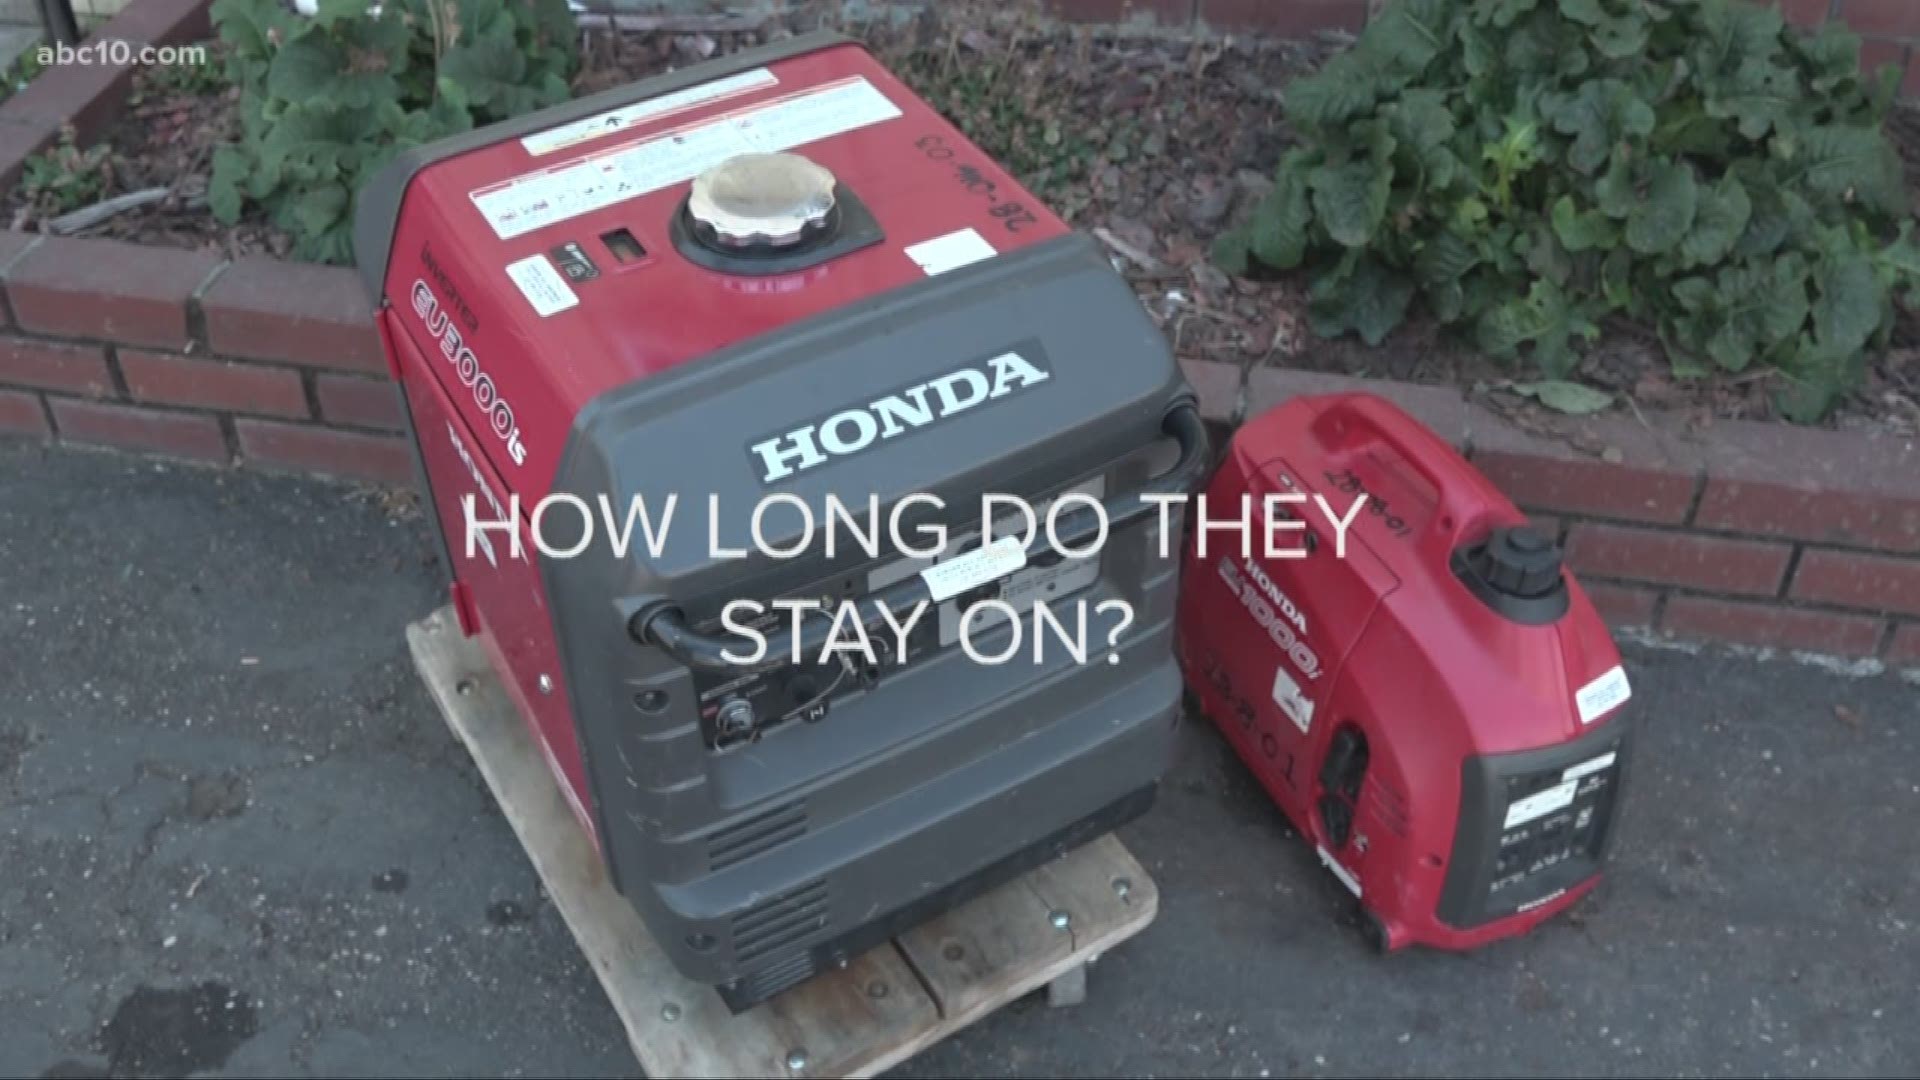 Here's what you need to know about buying and using a generator.